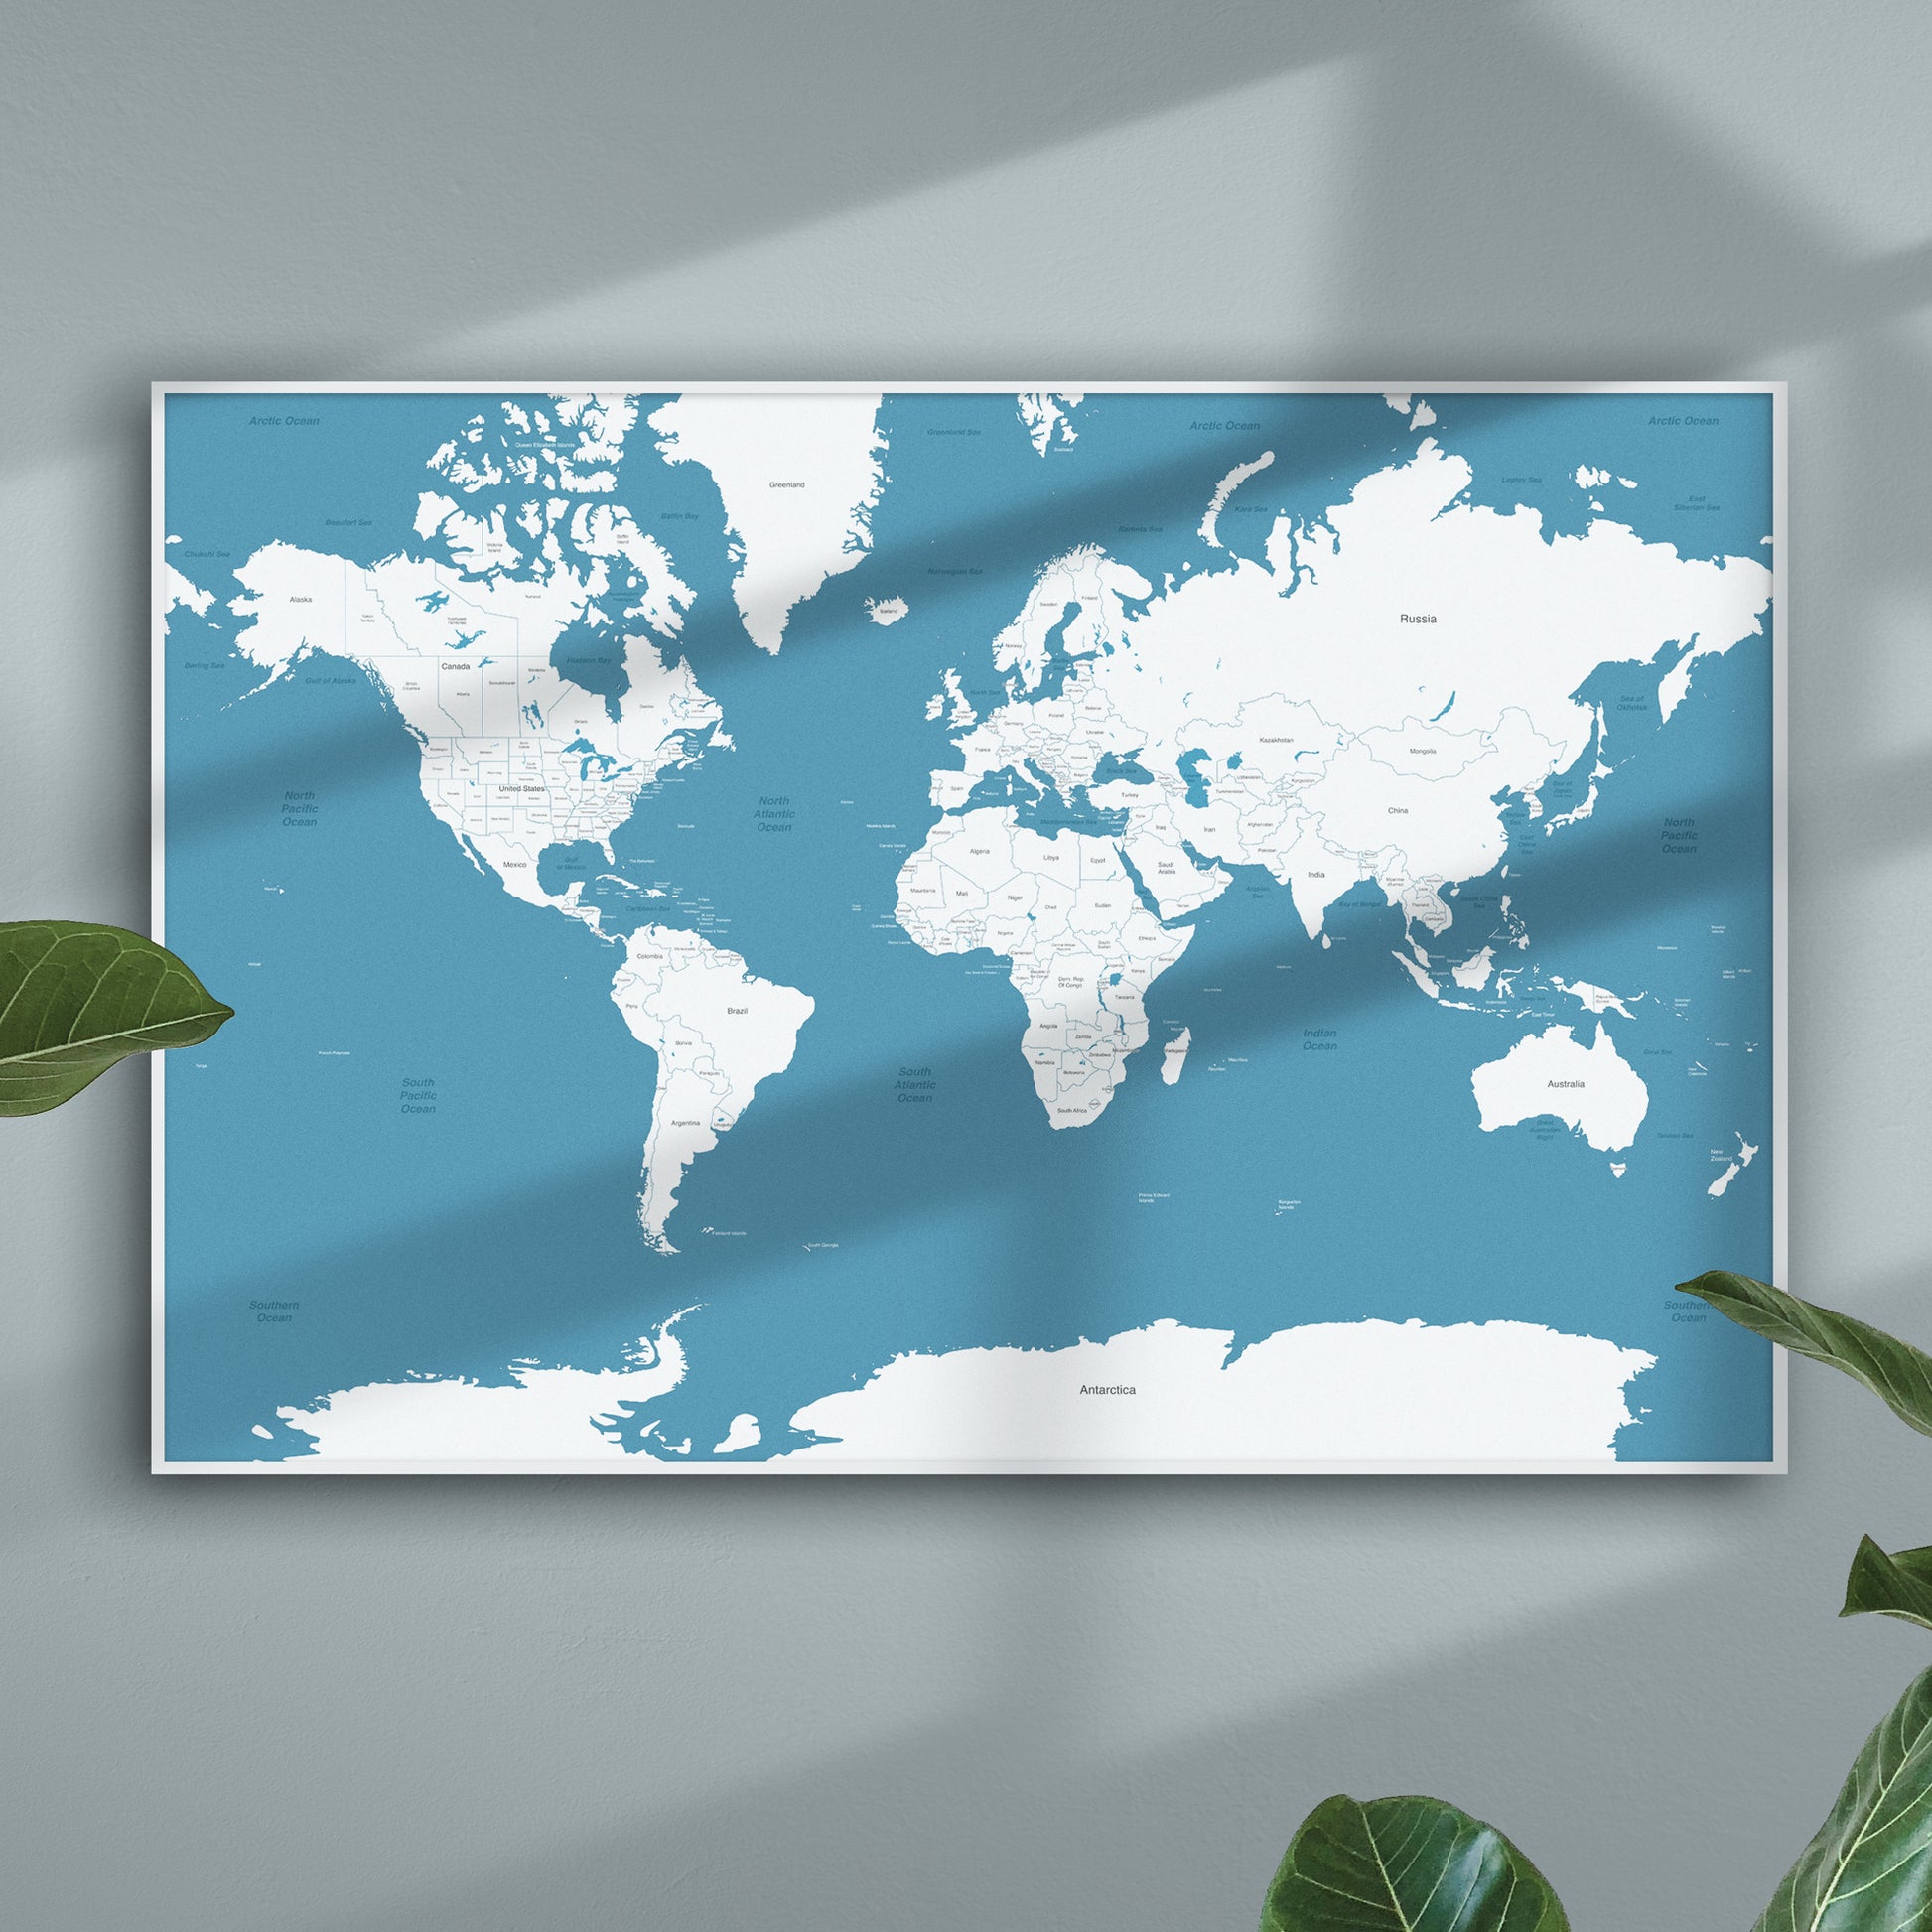 World Map Poster with Blue Sea and White Countries on Modern Wall with Shadows